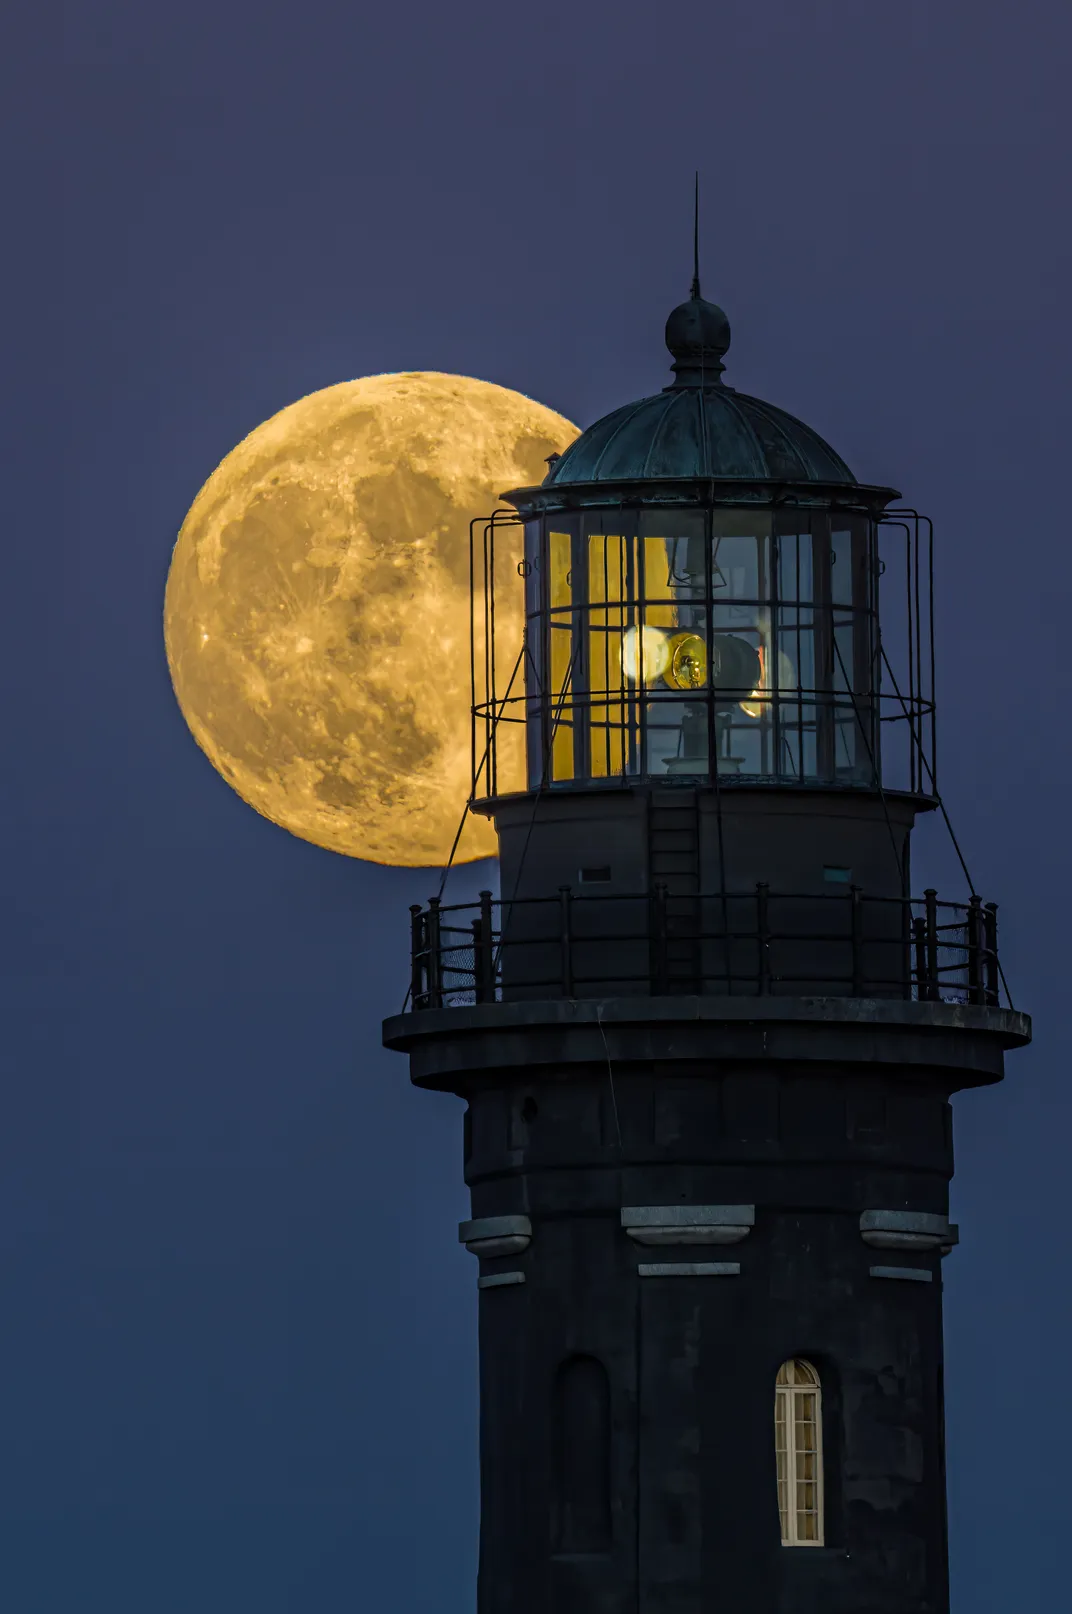 8- Powerful as it may be, on this evening, the lamp from the Fire Island Lighthouse is no competition for the illumination from the full moon.